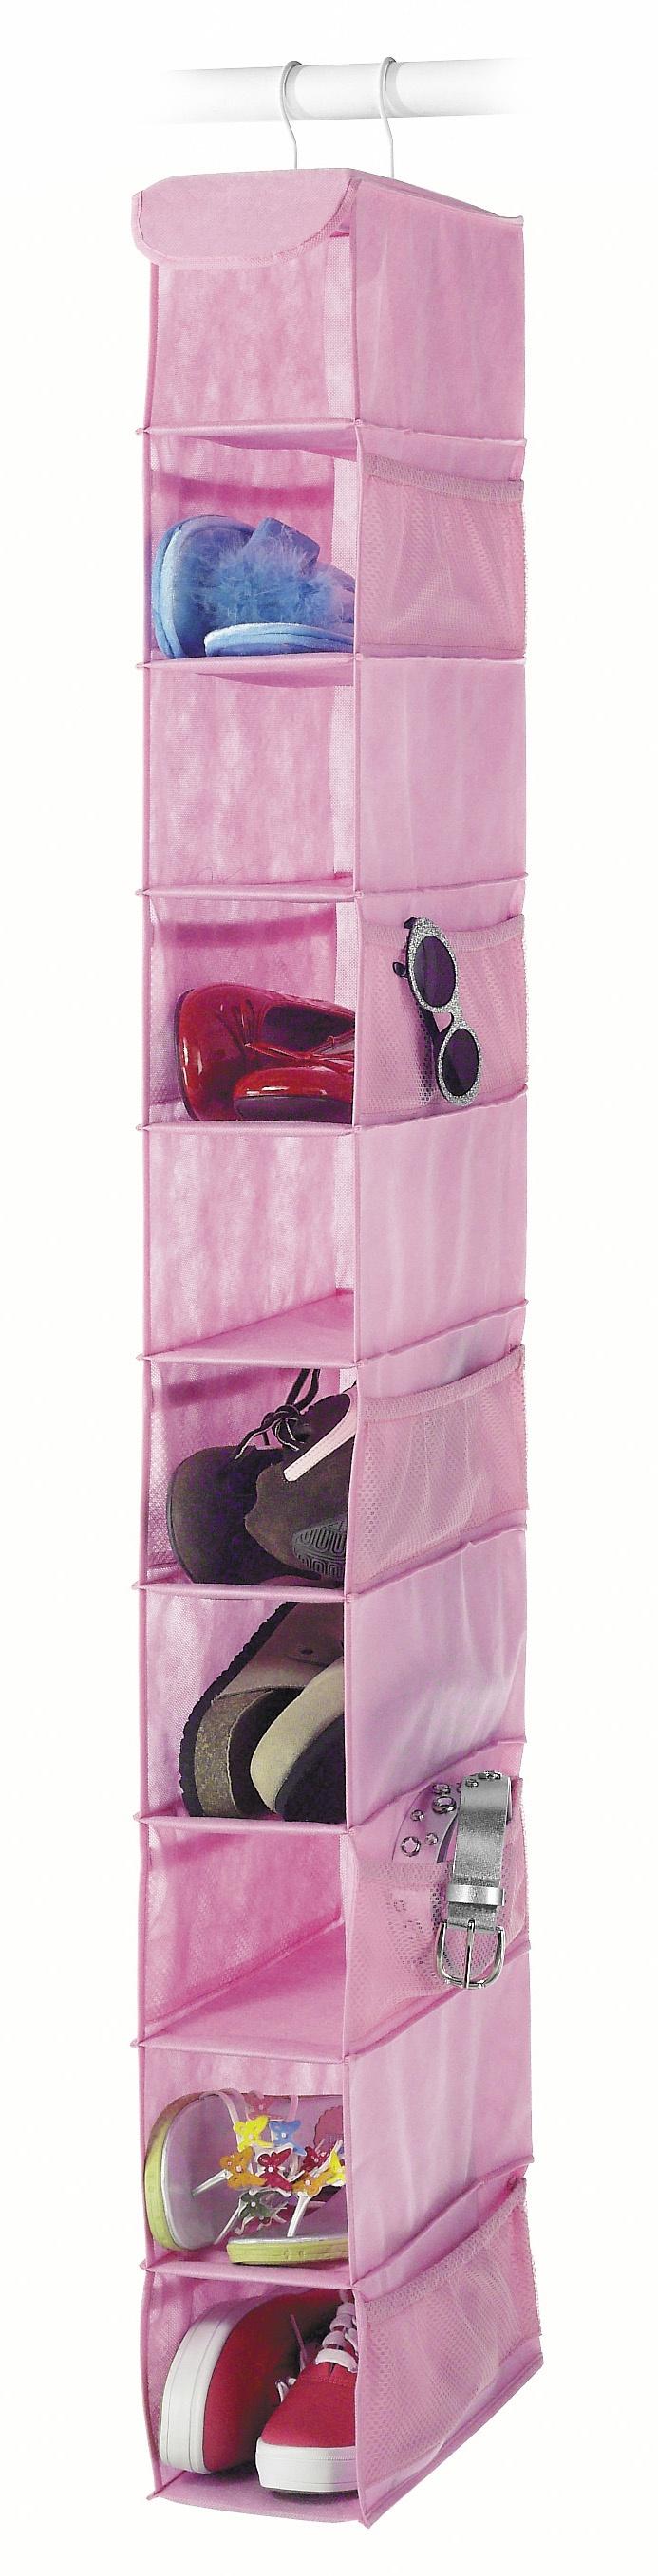 Whitmor 10-Shelf Polyester Mesh Hanging Shoe Shelves - Pink - Use for a Child, Teen, or Adult Room - image 1 of 3